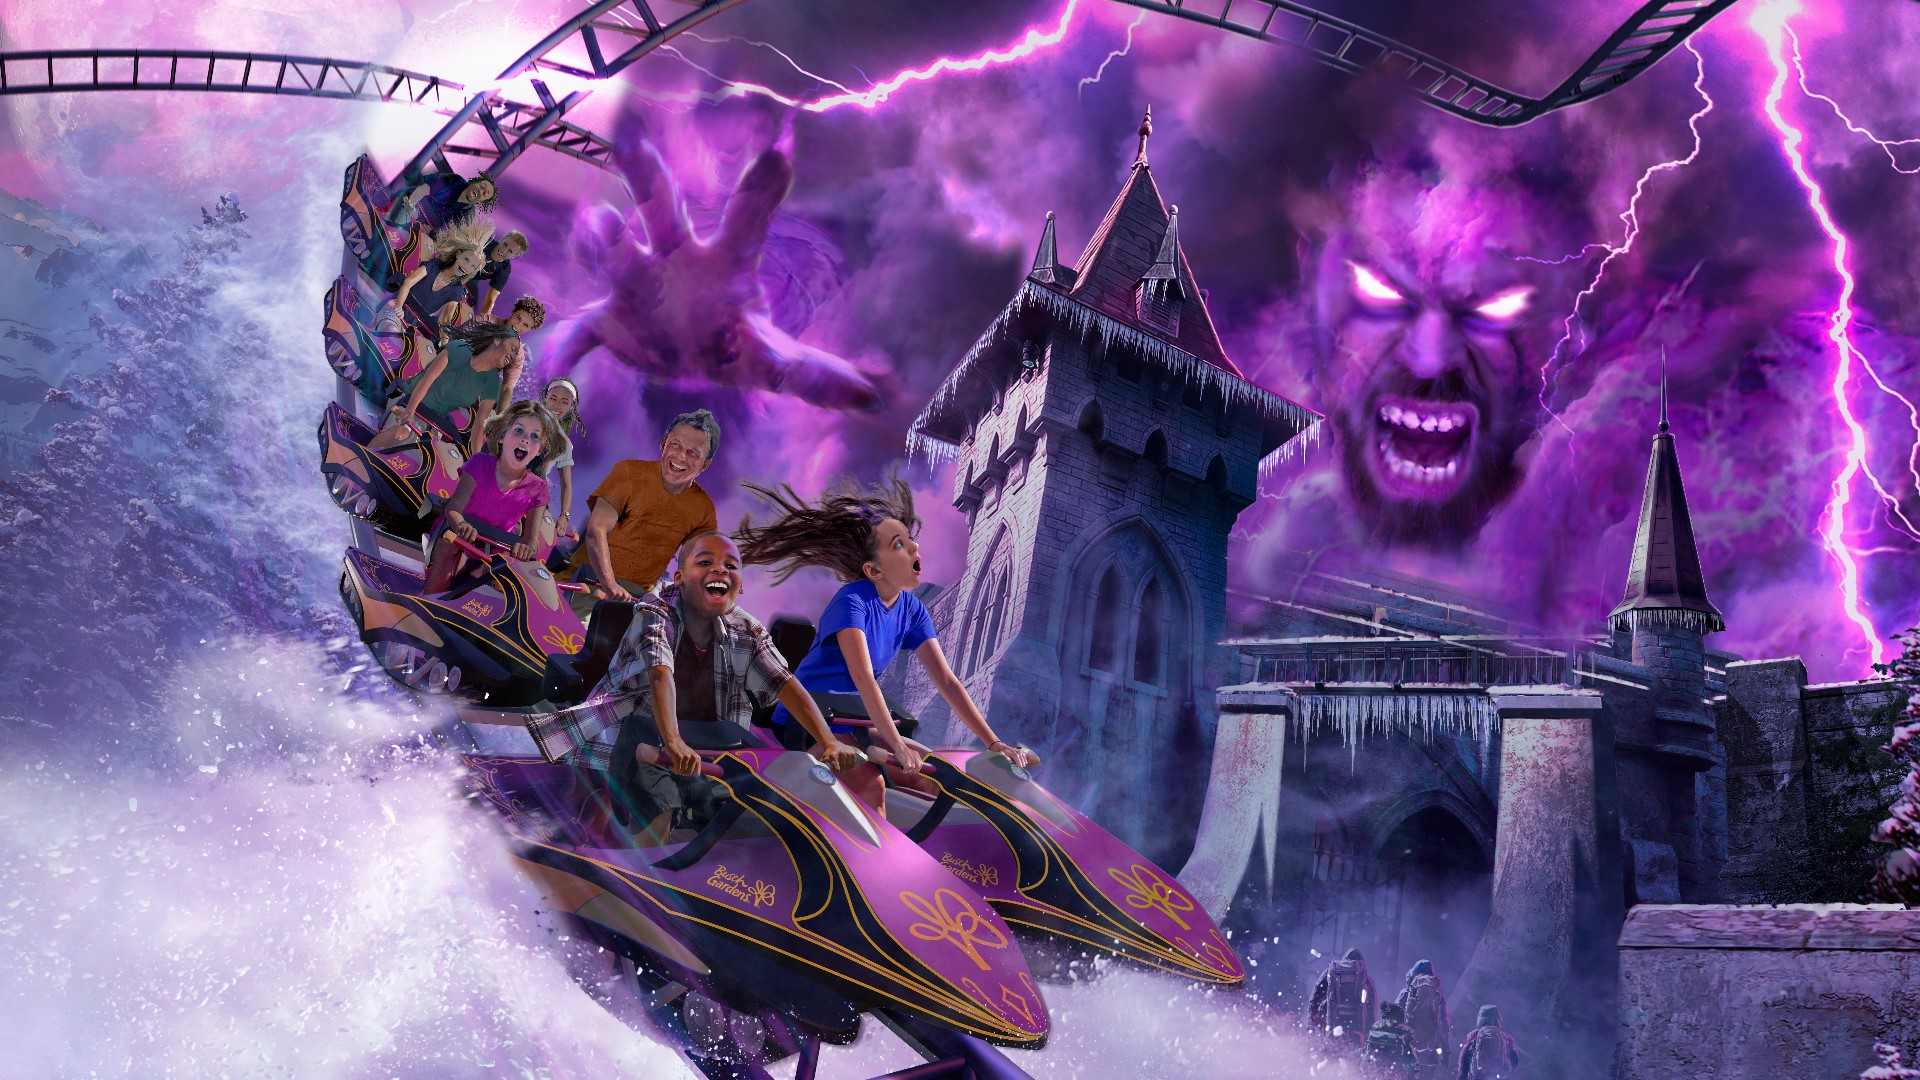 Busch Gardens Williamsburg's newest rollercoaster is ready to thrill park-goers!